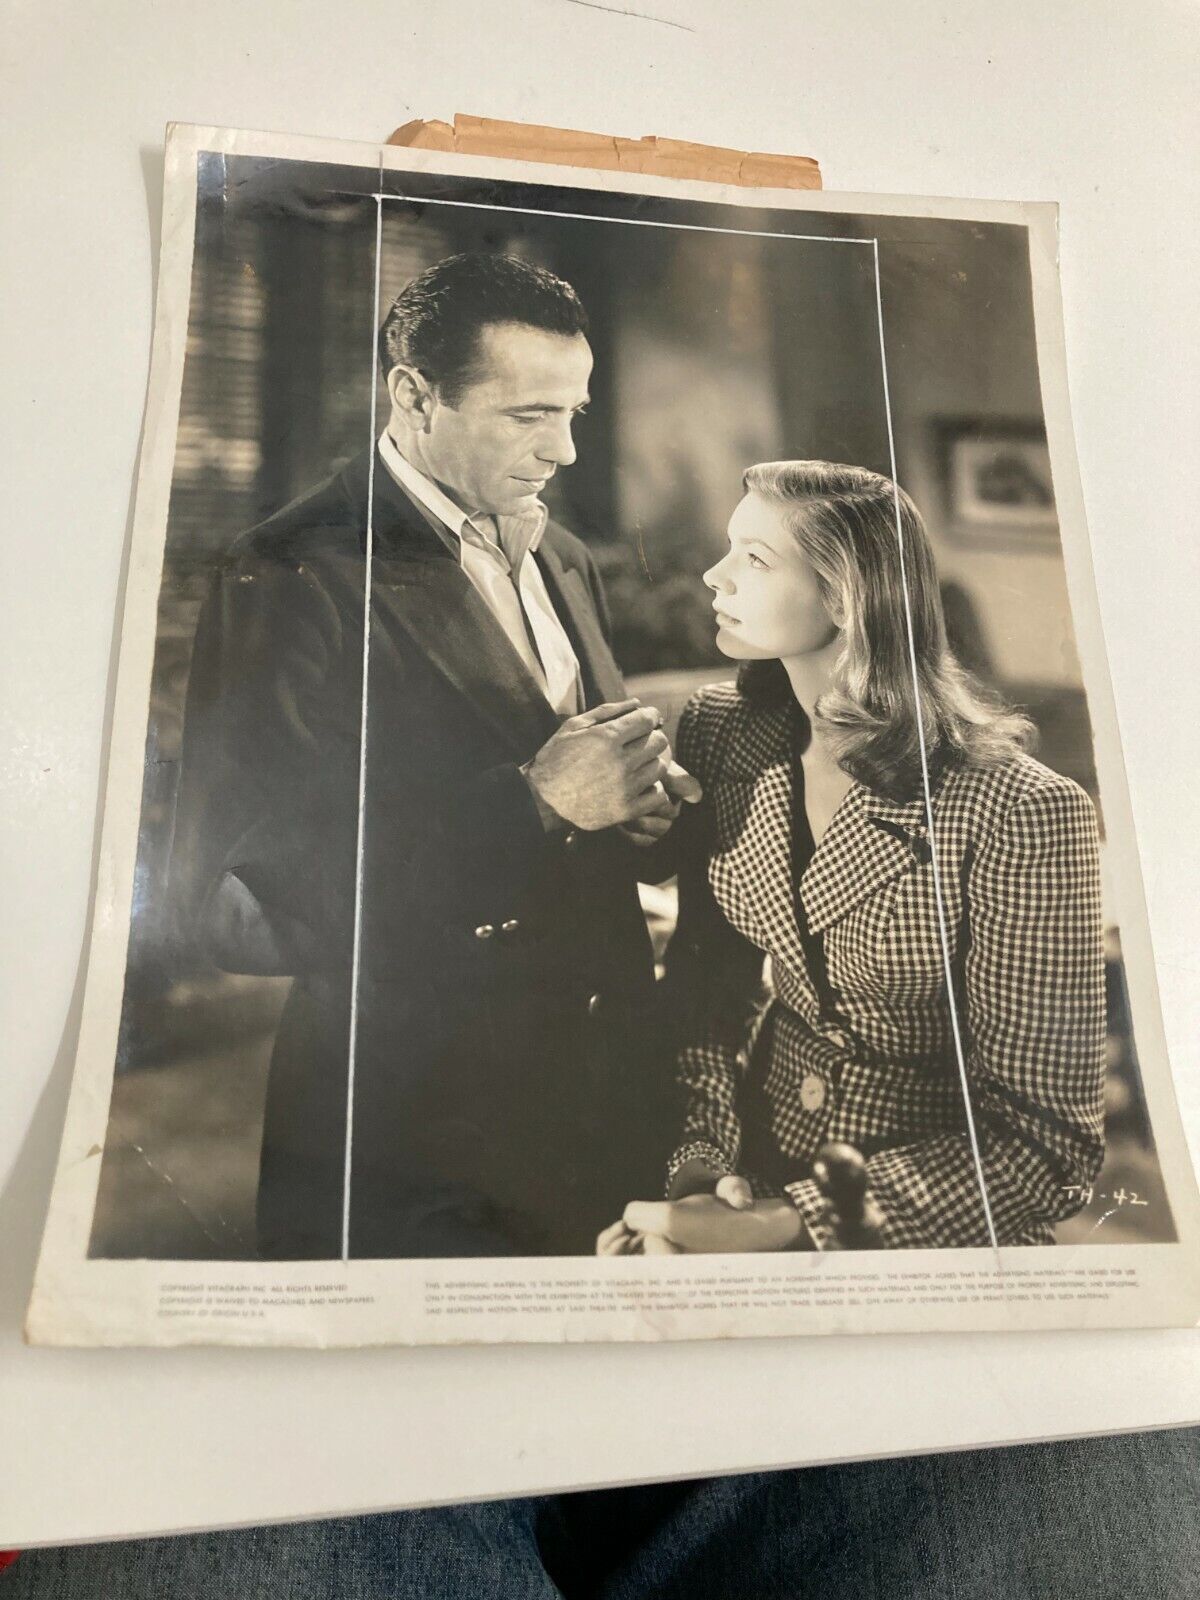 Lauren Bacall Photographic Prints - 7 Rare Examples 